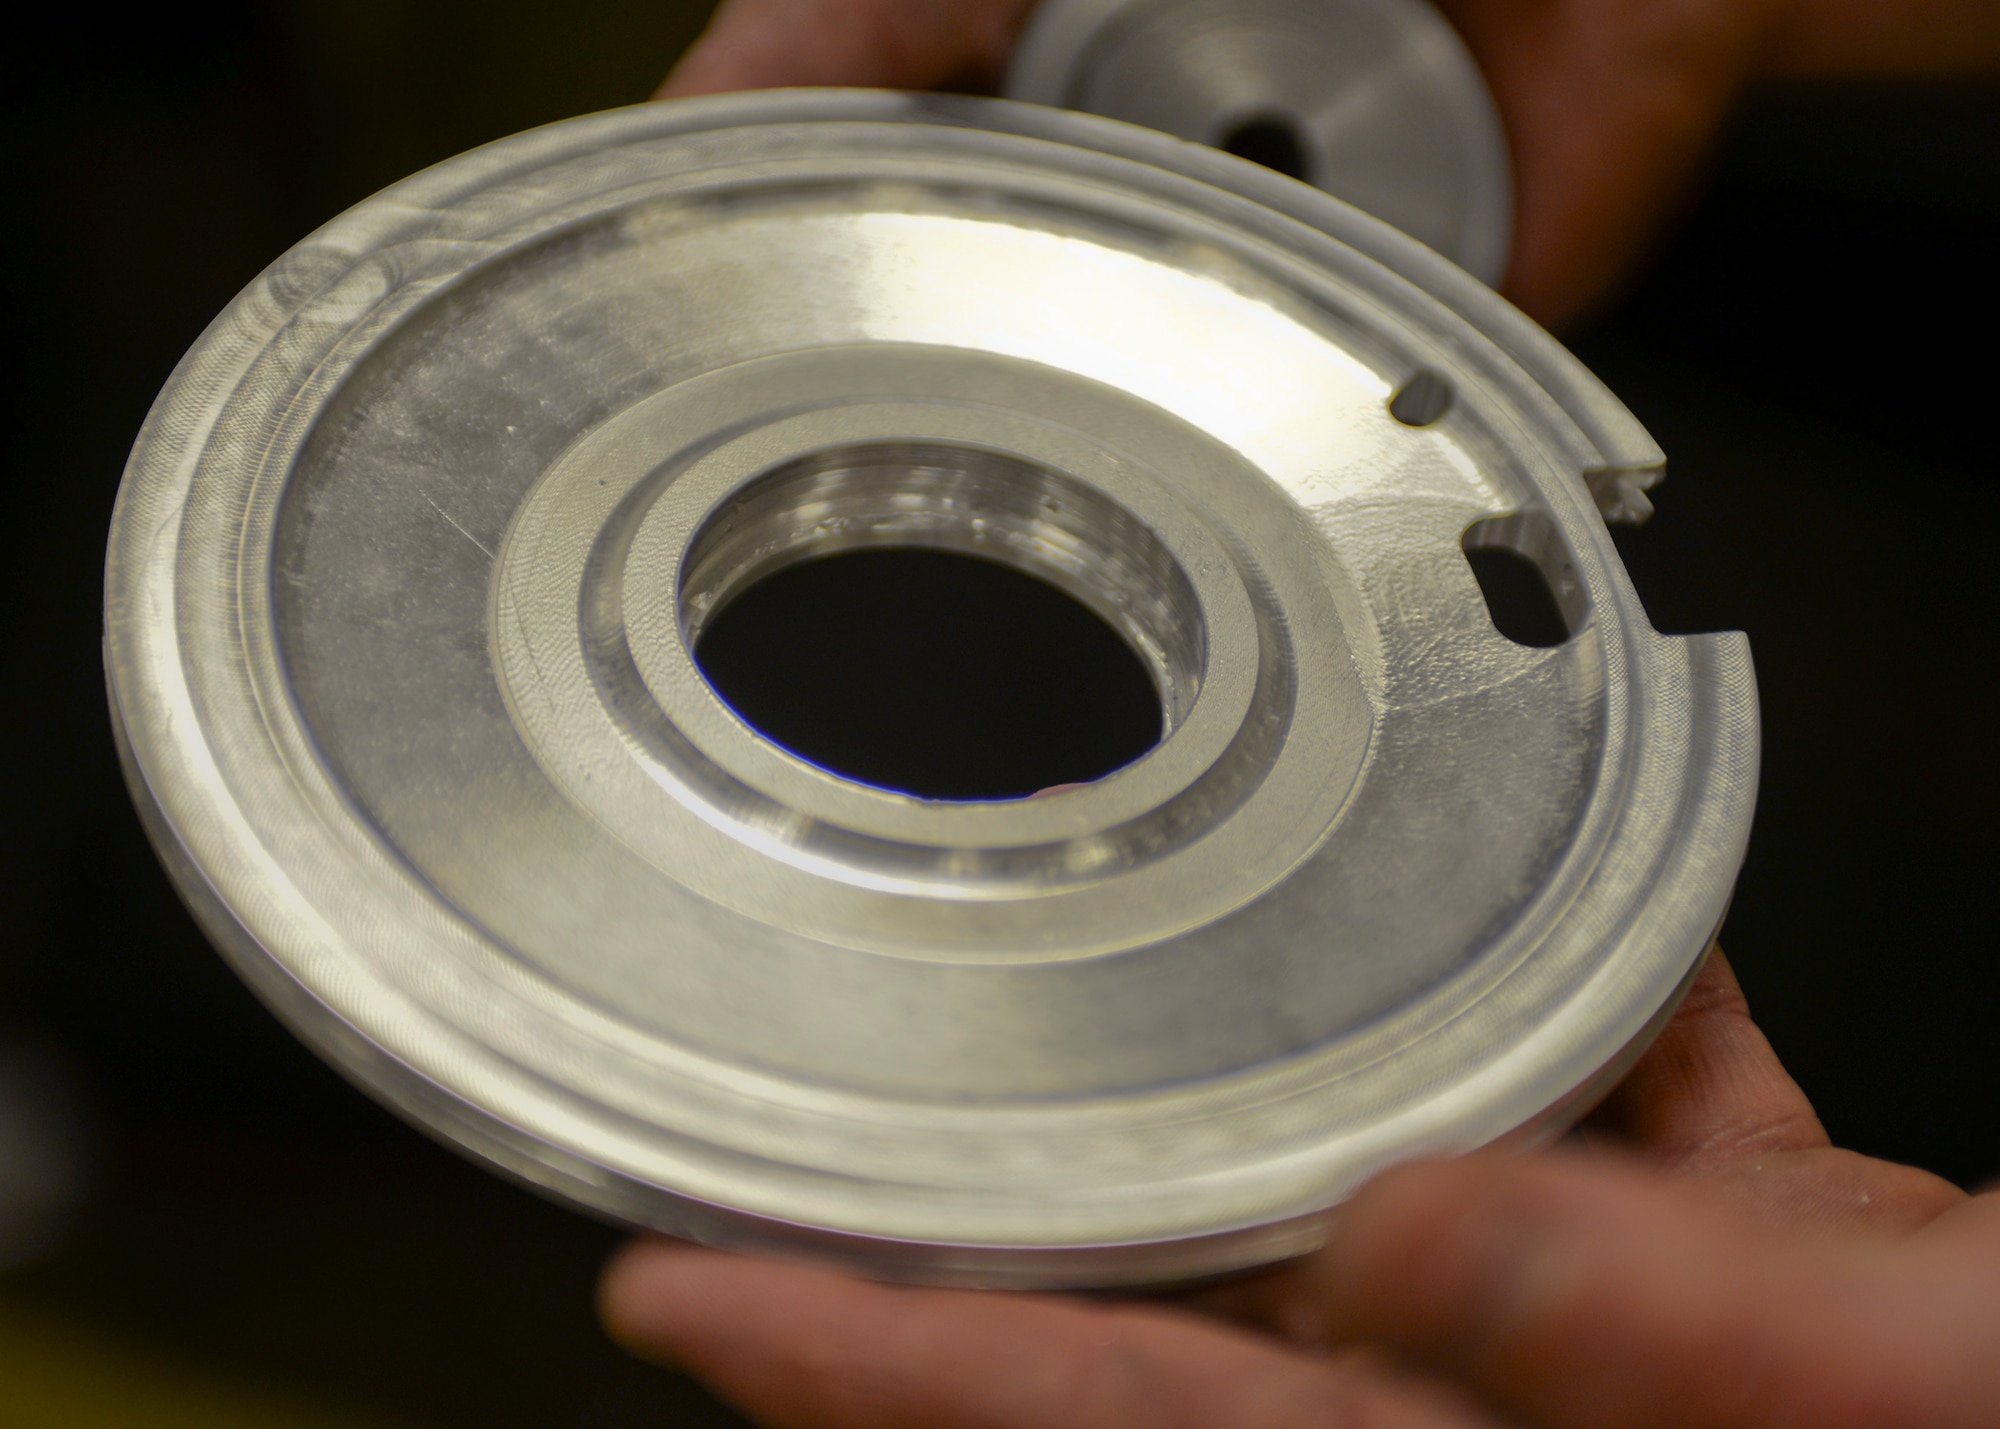 Staff Sgt. Adam Hebert, 28th Maintenance Squadron production supervisor, holds a B-52 Stratofortress drag sheet pulley at Ellsworth Air Force Base, S.D., Jan. 6, 2016. The metals flight creates aircraft parts that cannot be ordered through a supplies list and assists Minot Air Force Base, N.D., at times. (U.S. Air Force photo by Airman Sadie Colbert/Released)